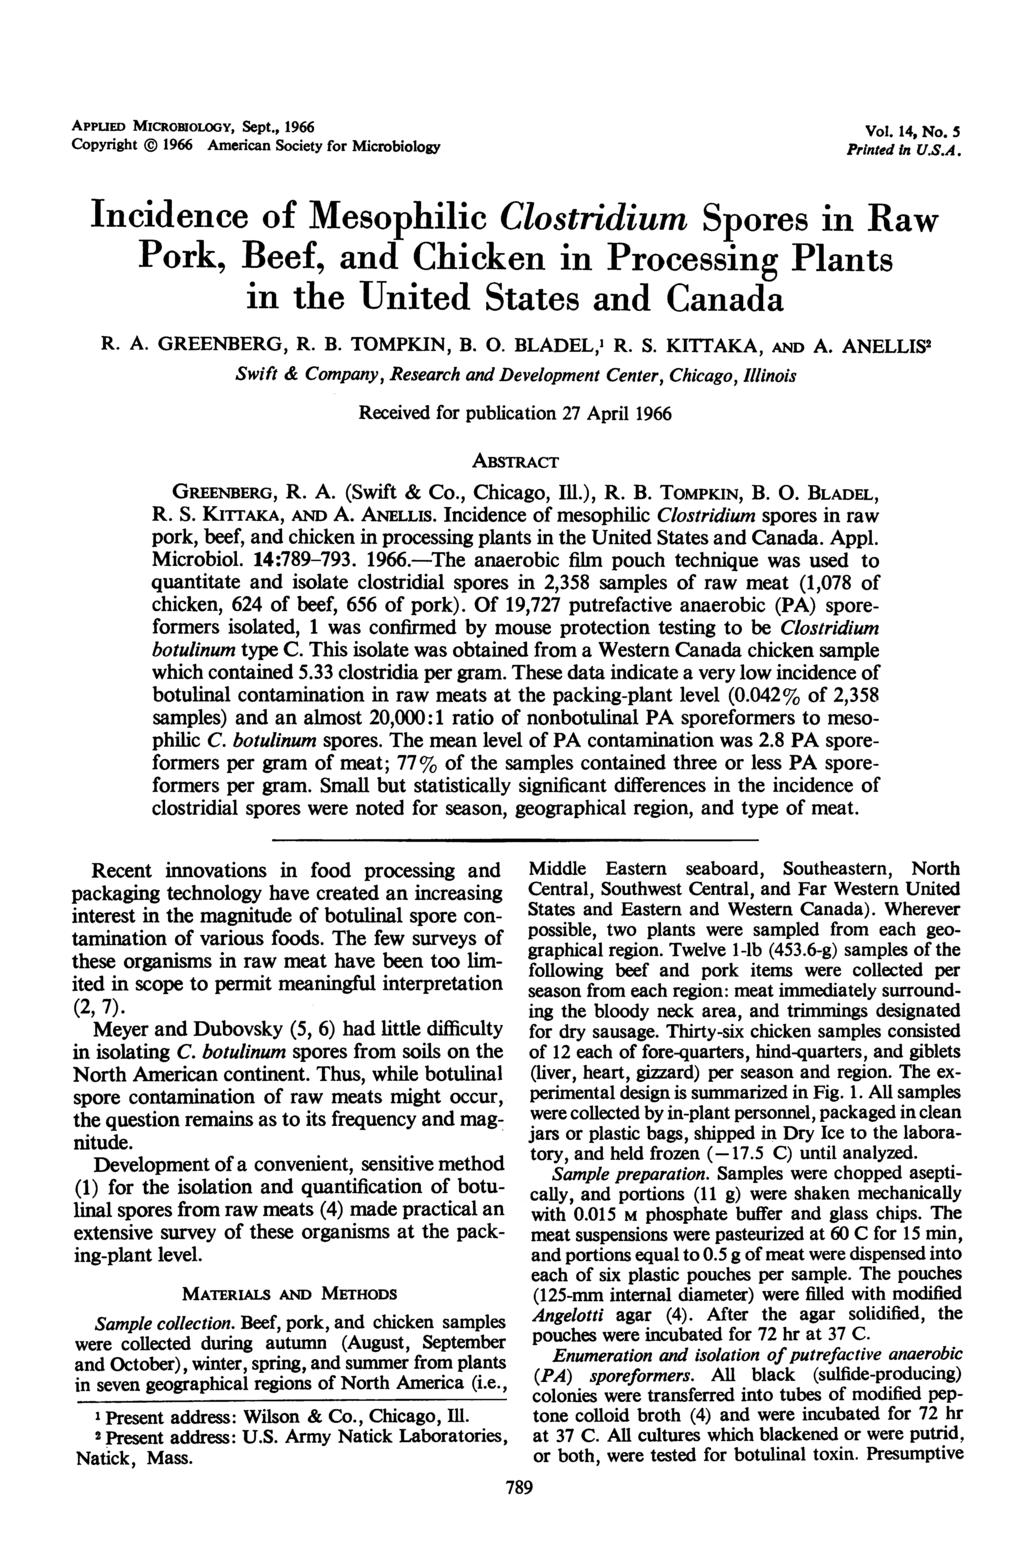 APPuED MICROBIOLOGY, Sept., 1966 Copyright @ 1966 American Society for Microbiology Vol. 14, No. 5 Printed In U.S.A. Incidence of Mesophilic Clostridium Spores in Raw Pork, Beef, and Chicken in Processing Plants in the United States and Canada R.